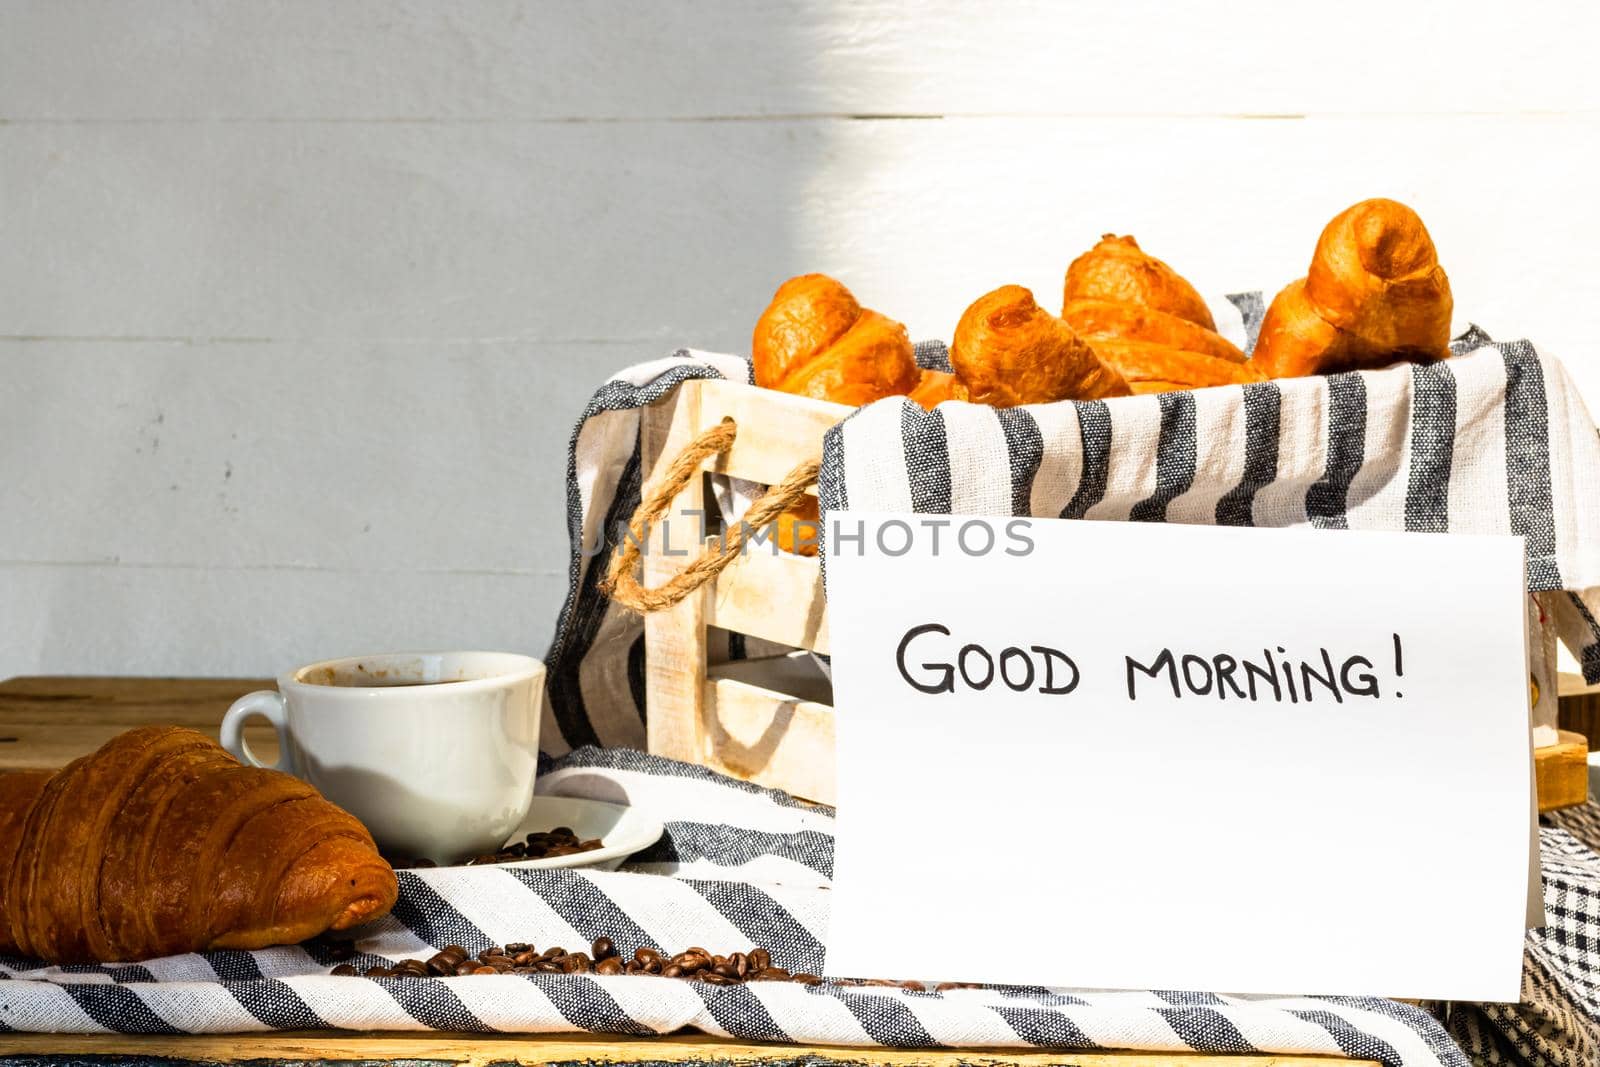 Coffee cup and buttered fresh French croissant on wooden crate. Food and breakfast concept. Morning message “good morning” on white board